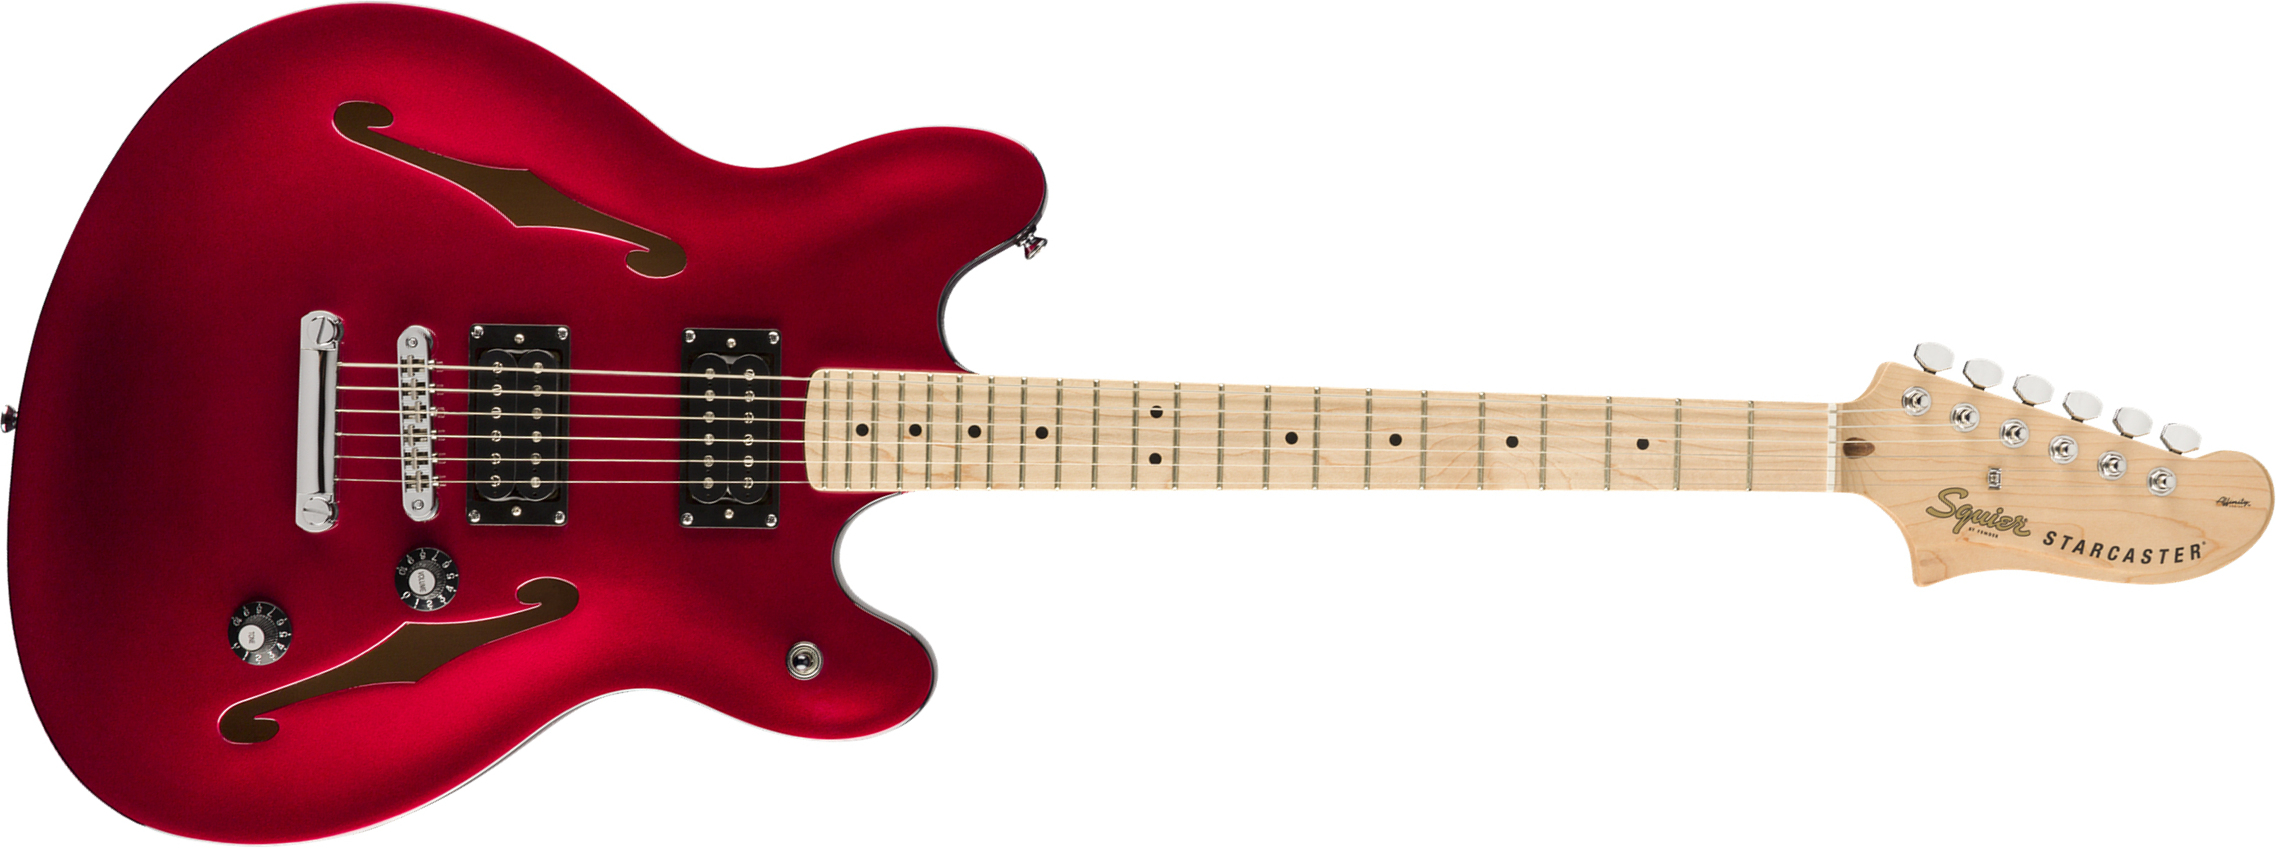 Squier Starcaster Affinity 2019 Hh Ht Mn - Candy Apple Red - Semi-Hollow E-Gitarre - Main picture